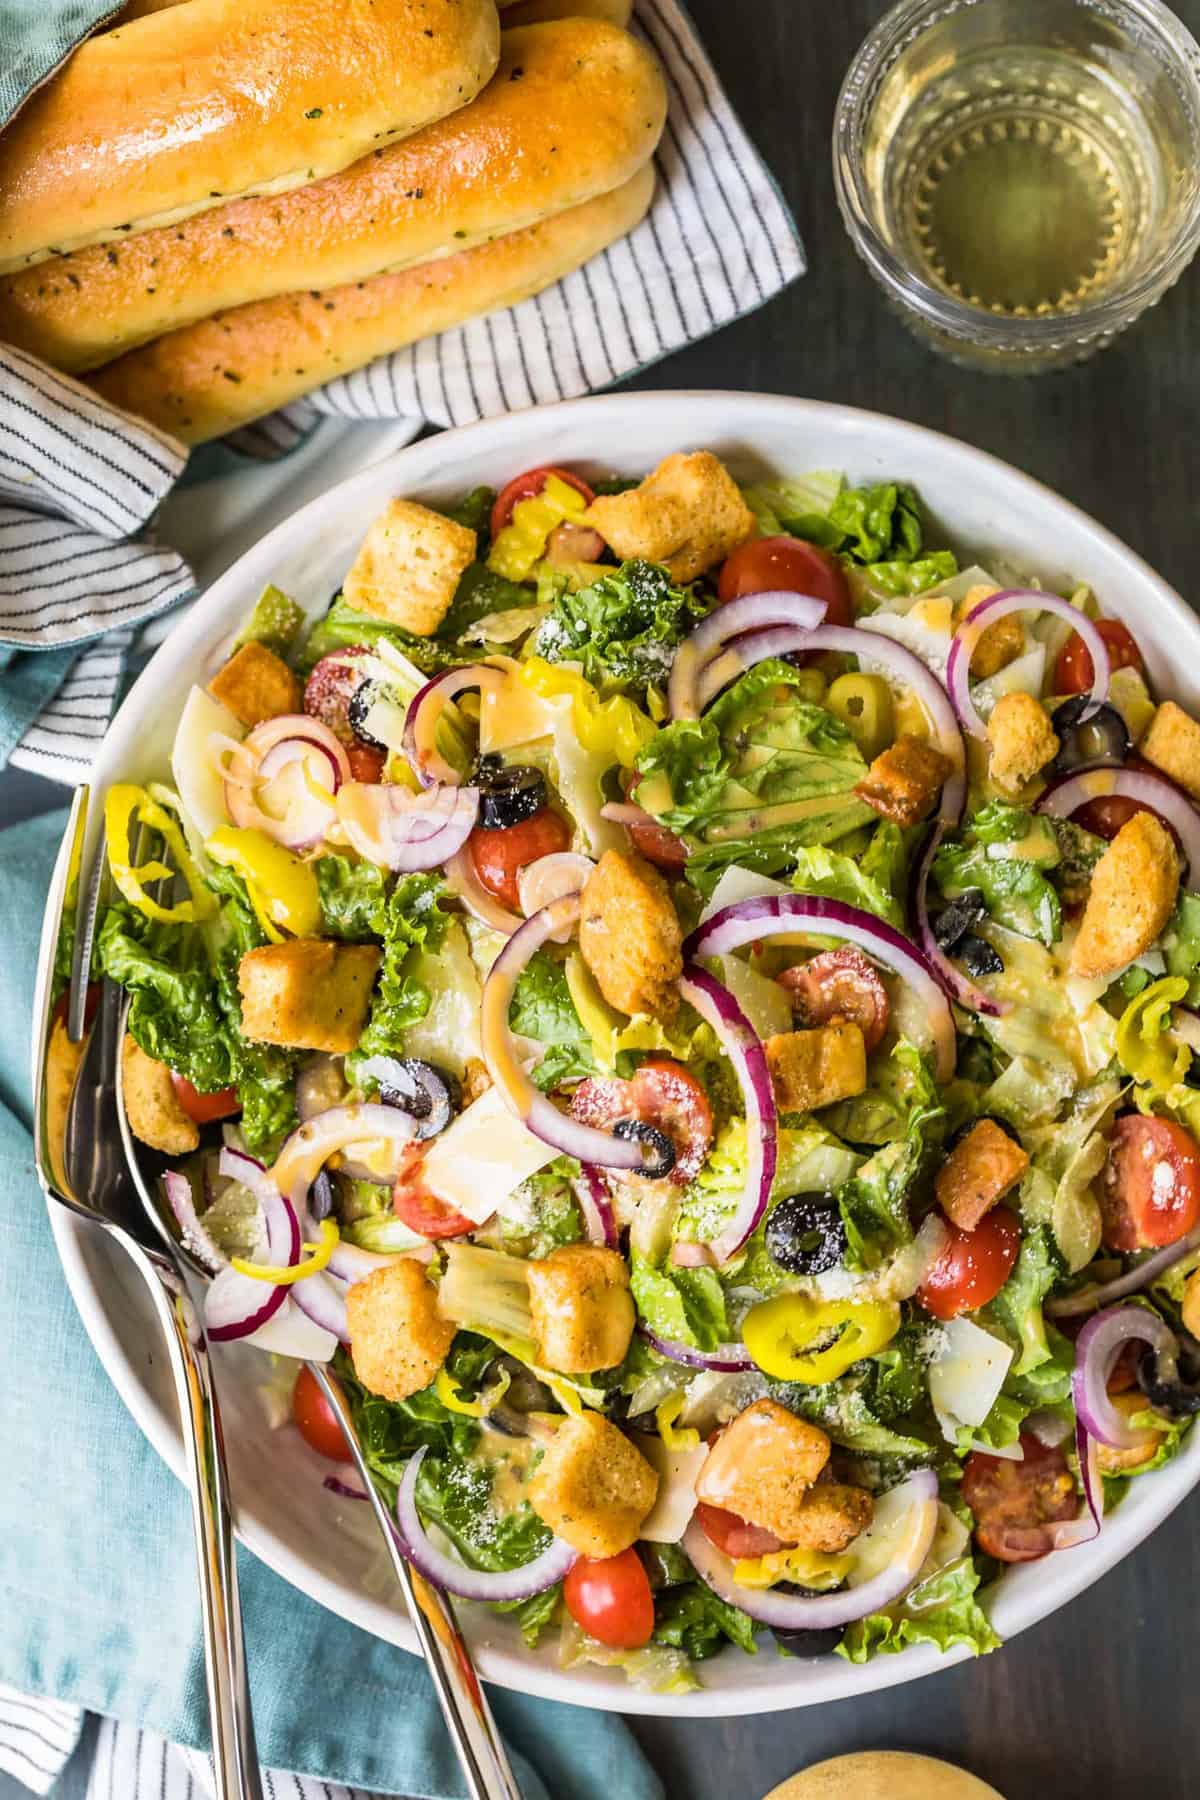 Olive Garden Salad with Copycat Dressing Recipe - The Cookie Rookie®